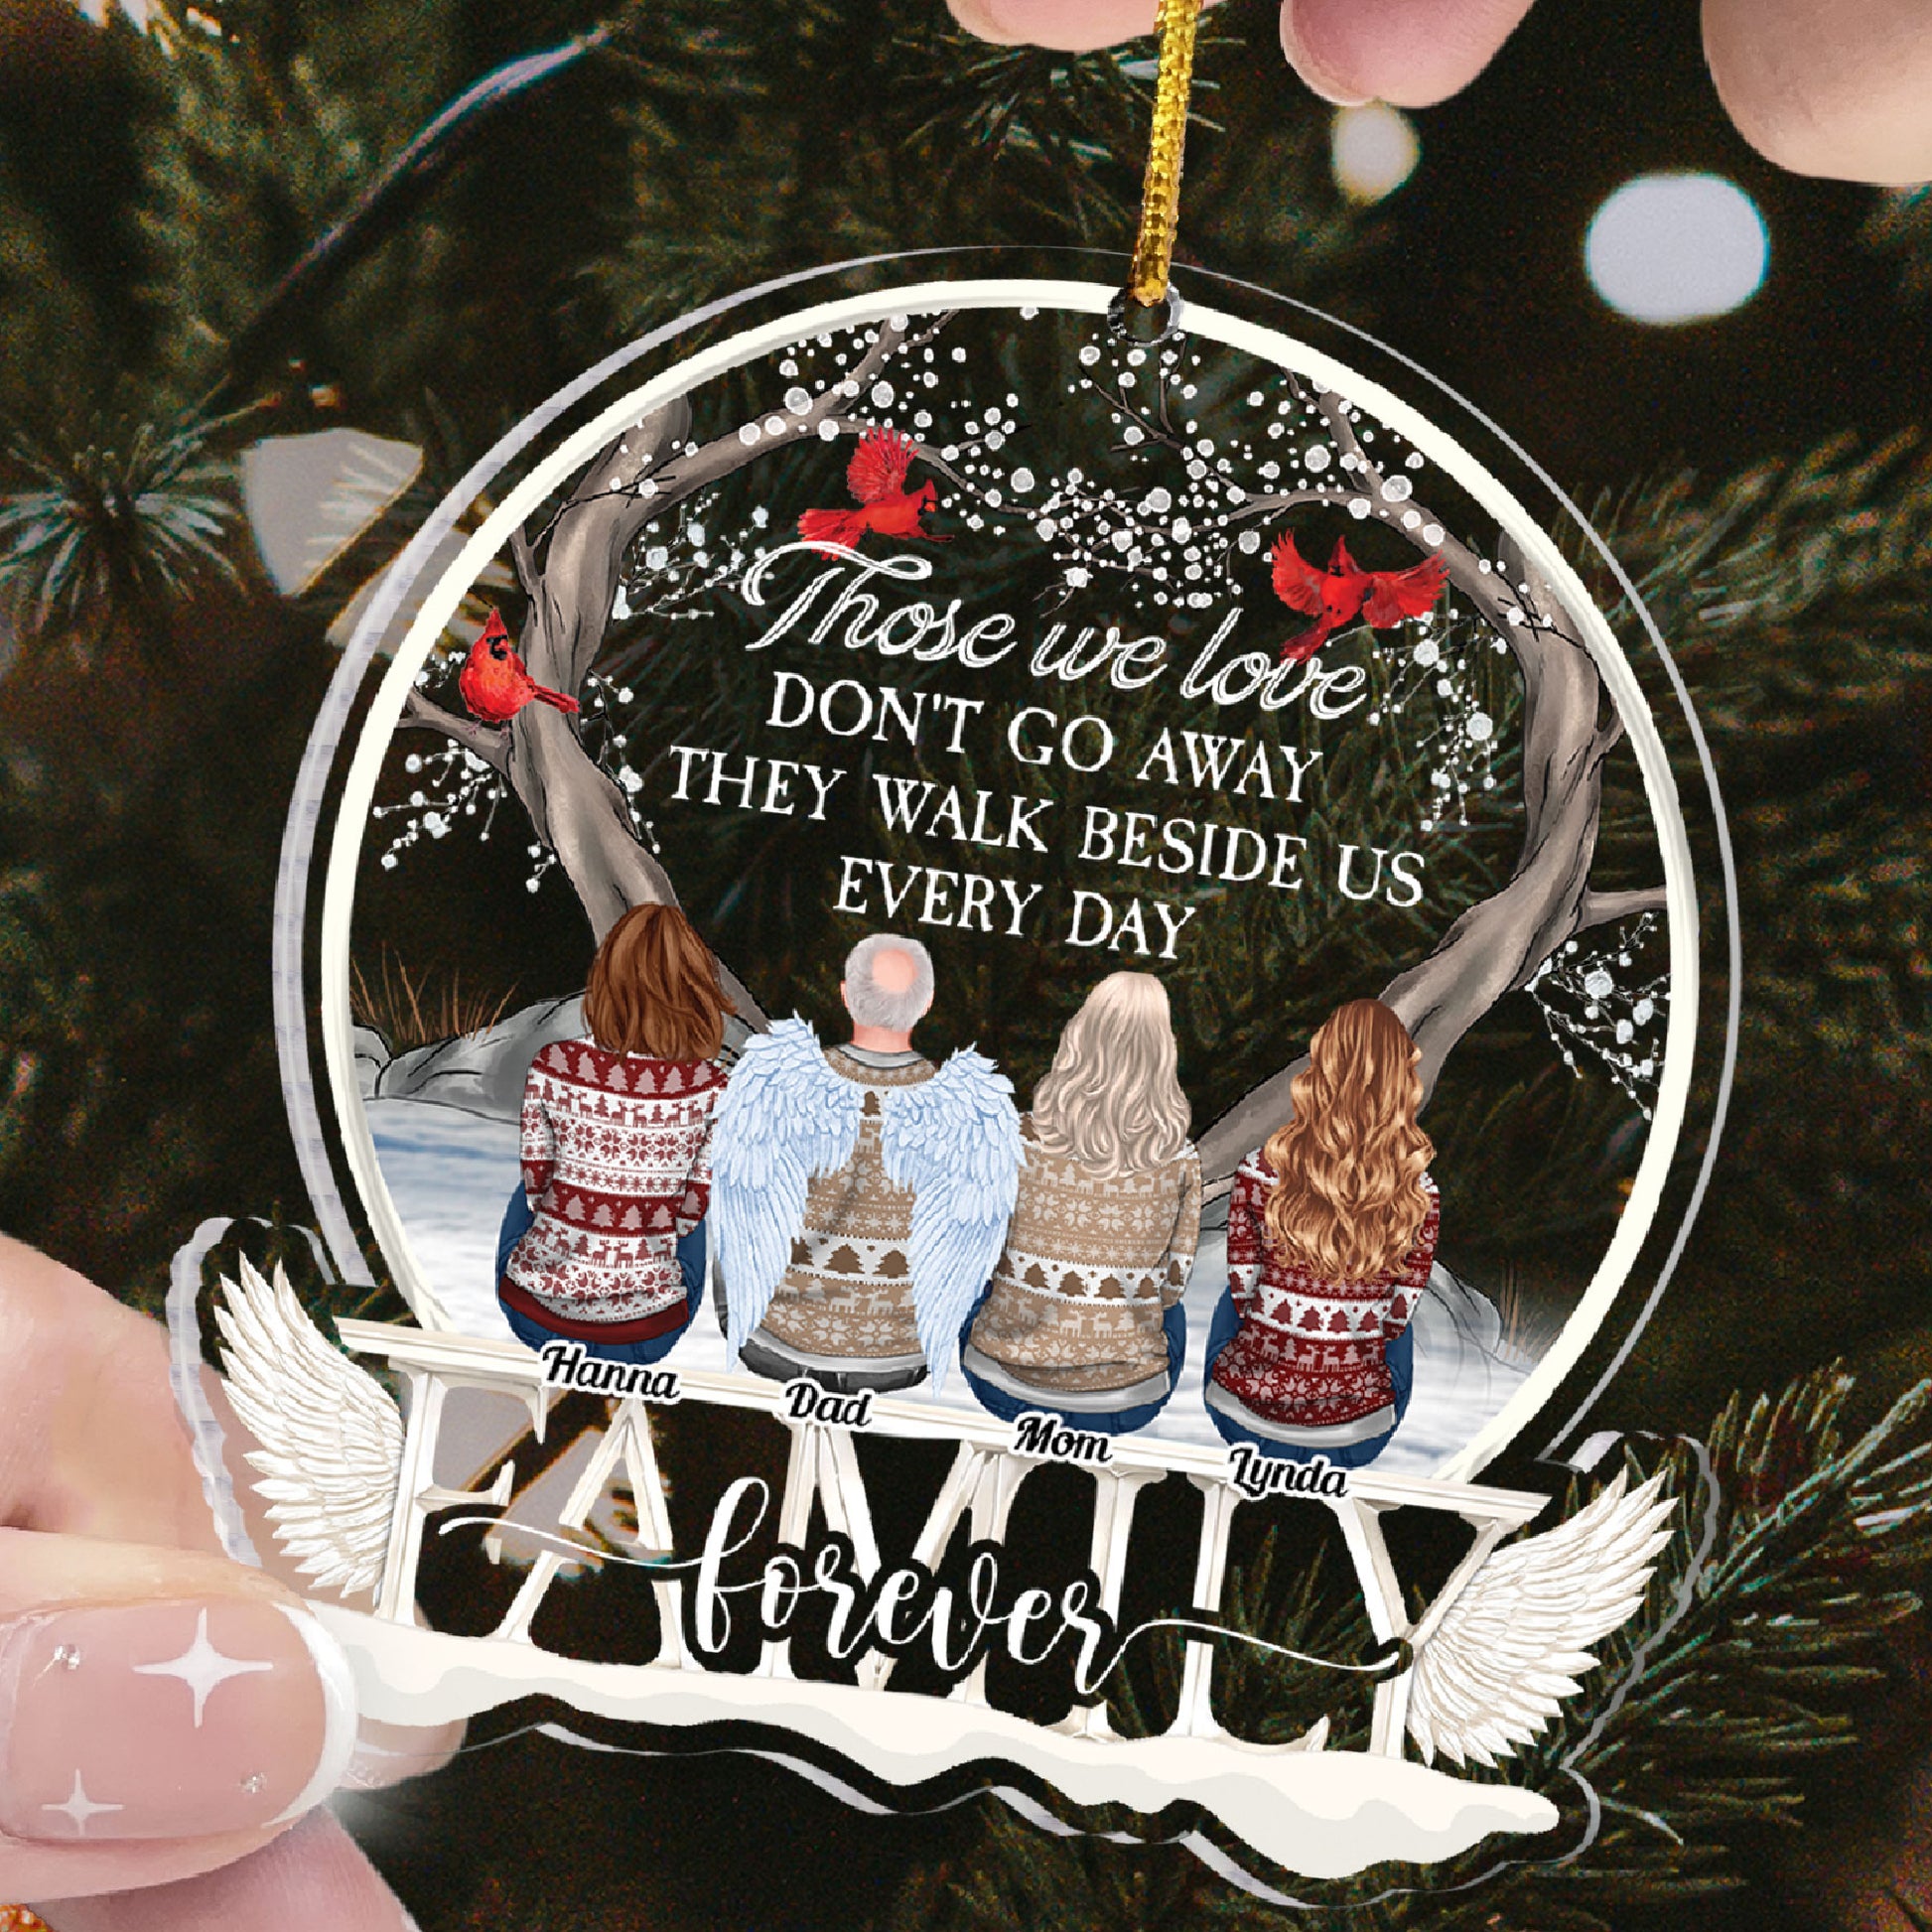 Personalized Ornament, Those We Love Don't Go Away They Walk